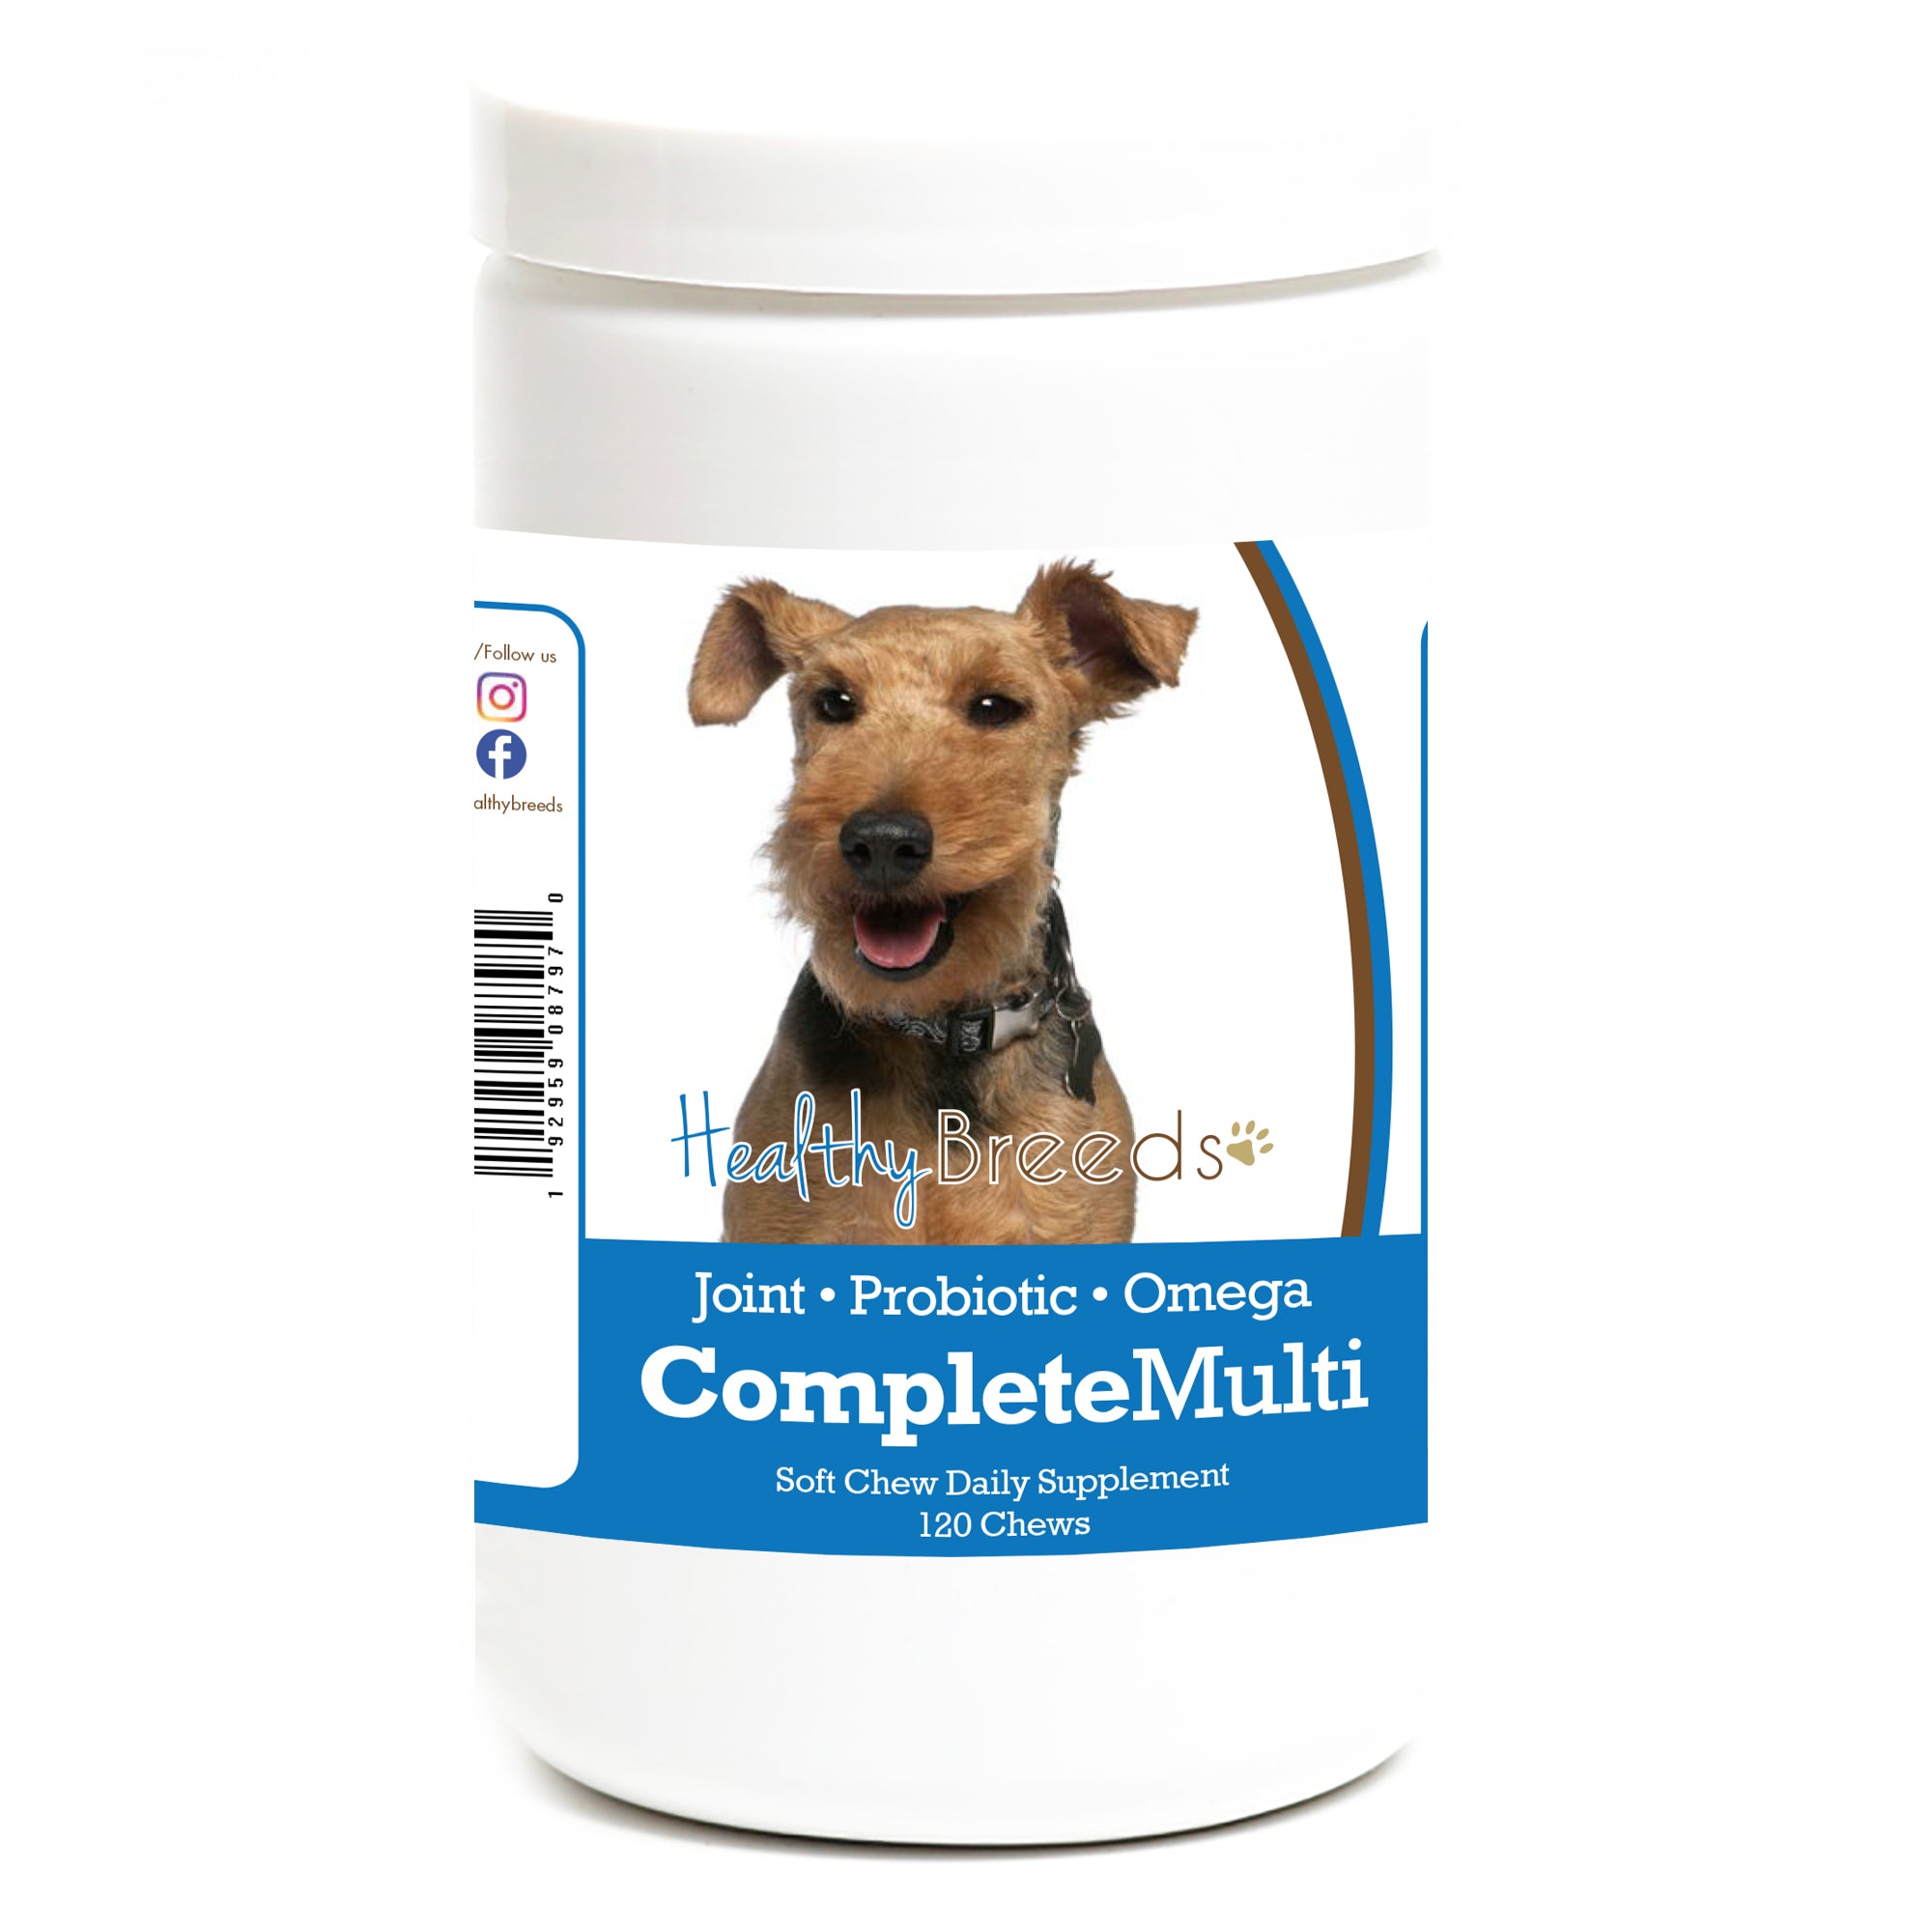 Welsh Terrier All In One Multivitamin Soft Chew 120 Count